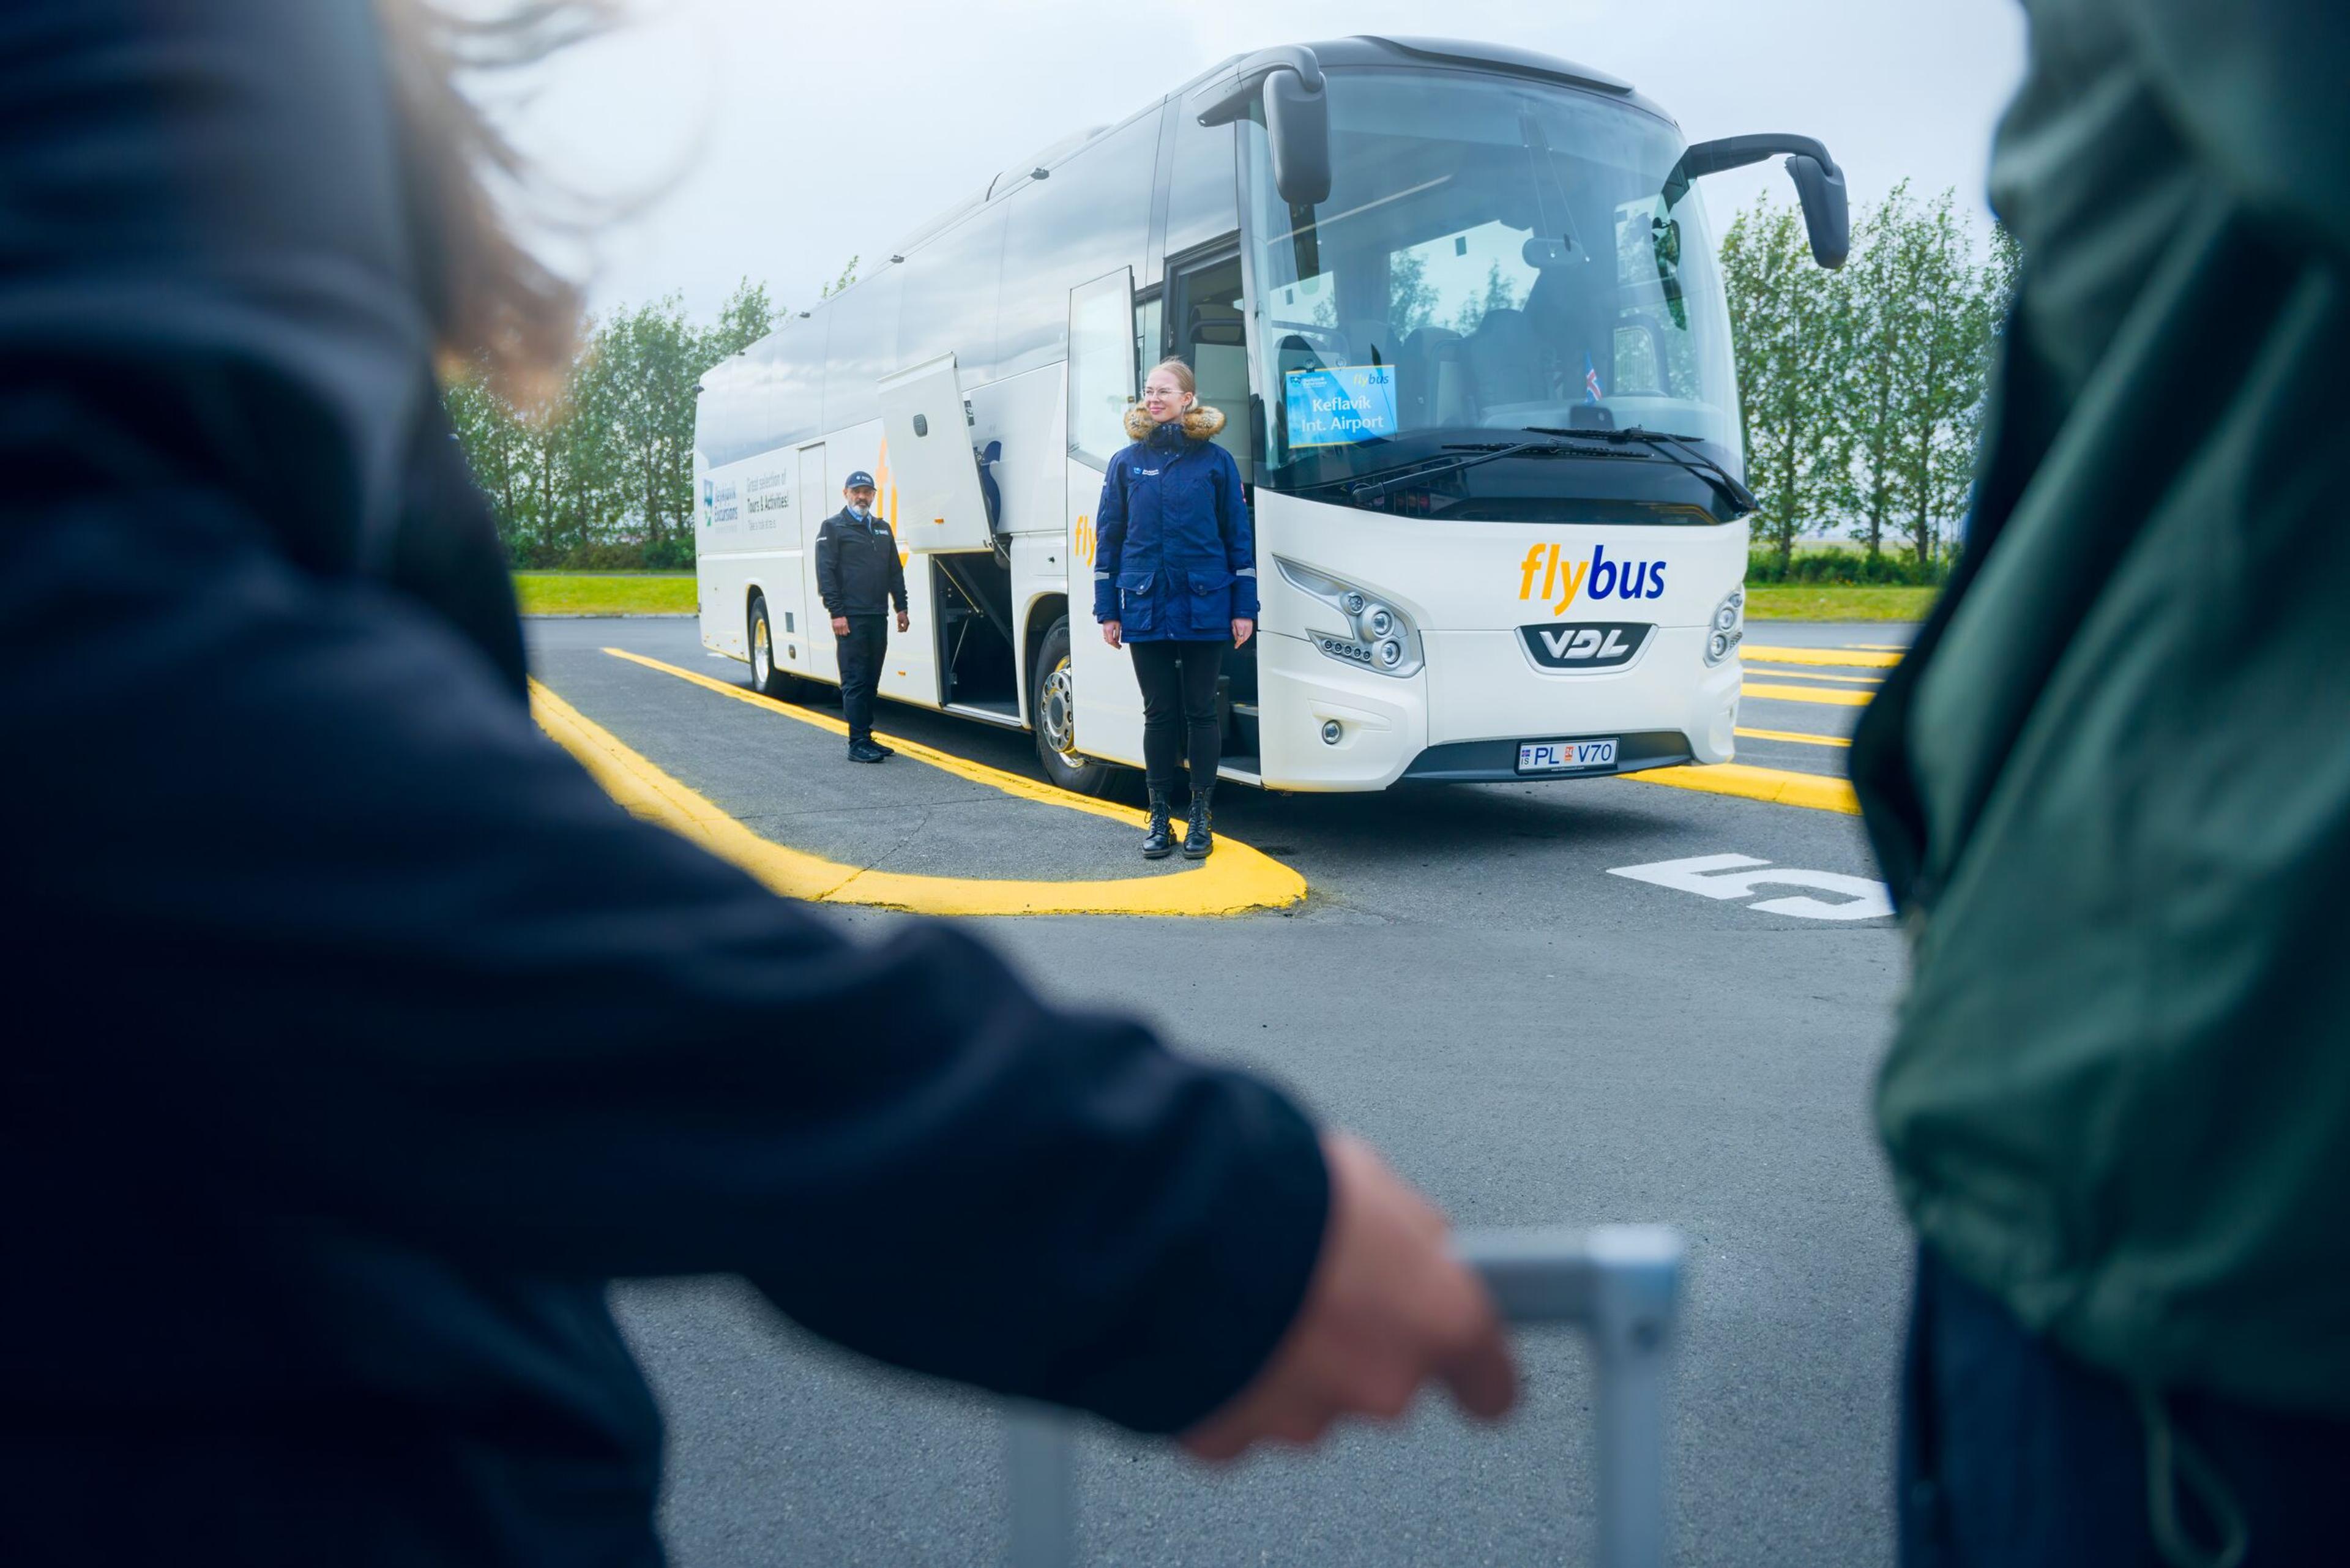 Passangers waiting to board on a flybus bus at BSI terminal in Reykjavík. White bus in the background.